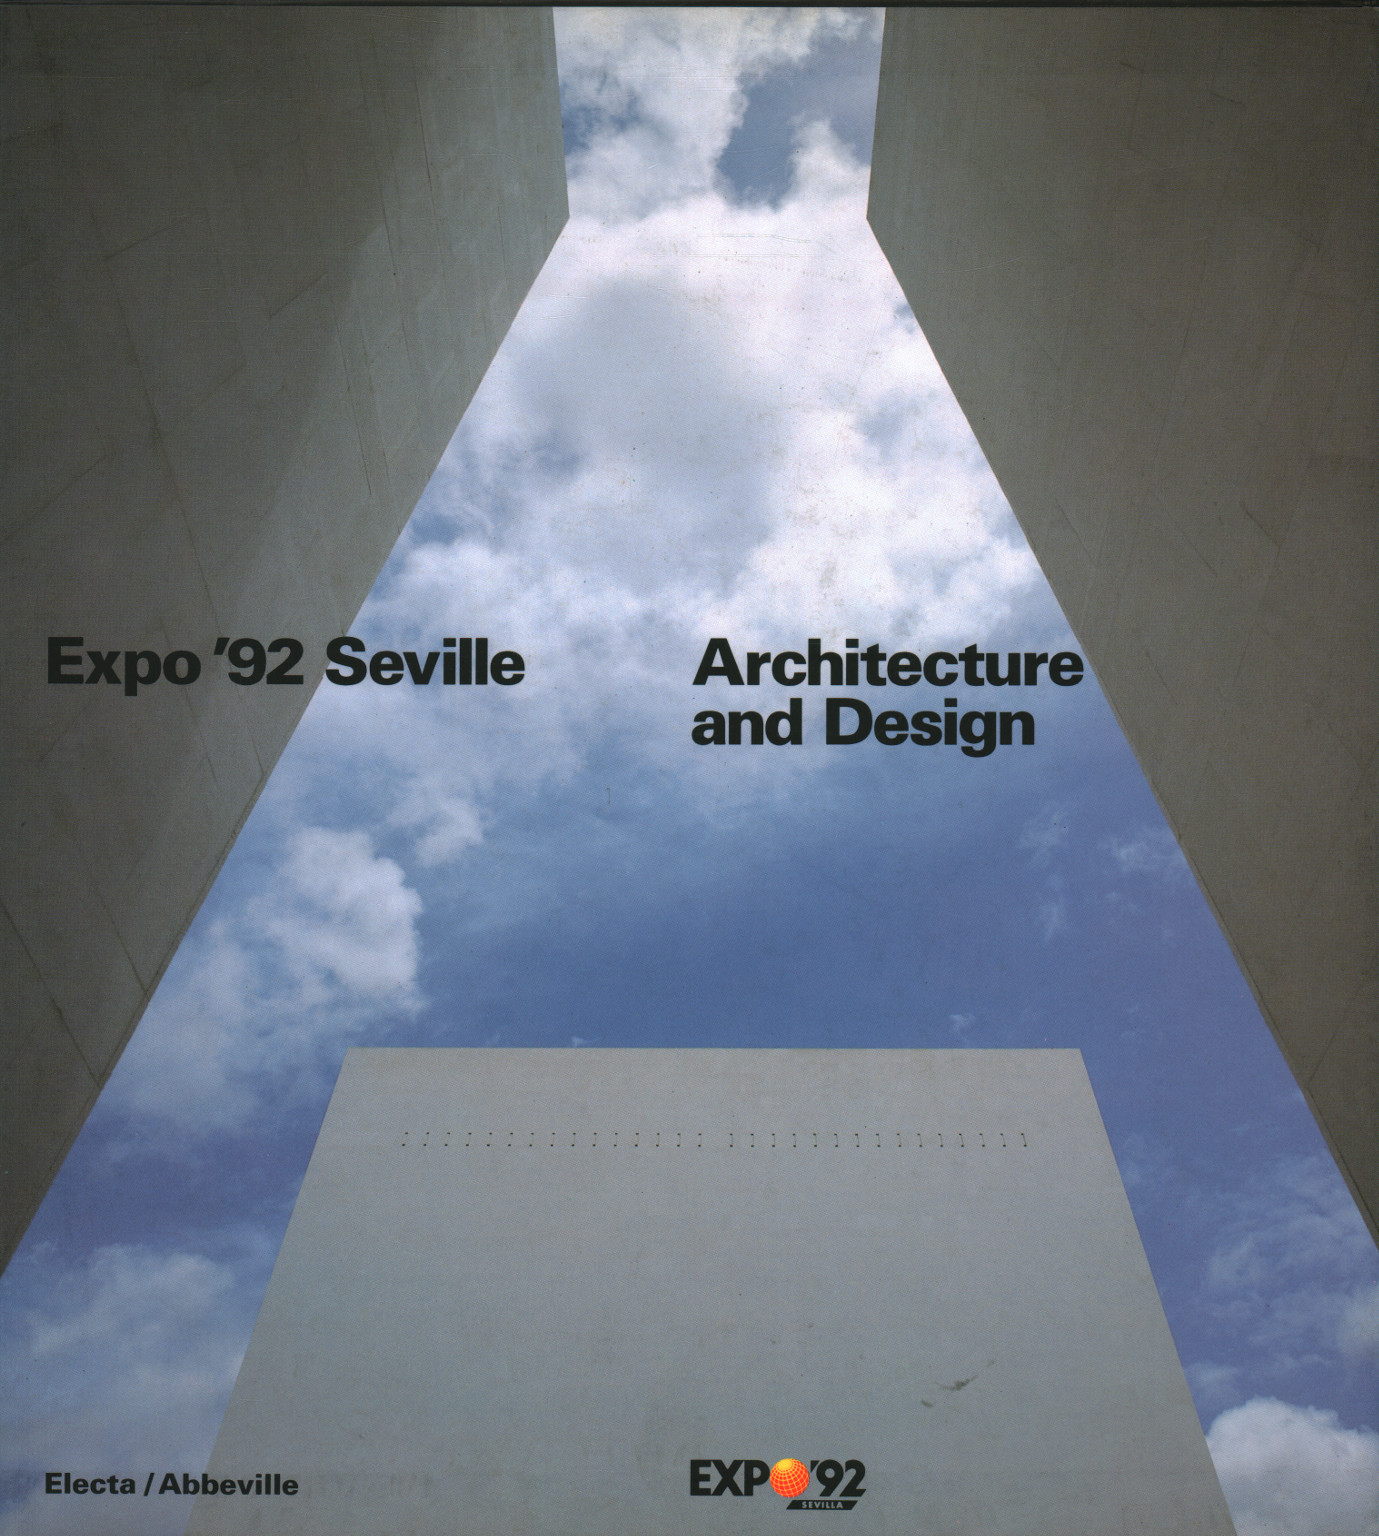 Expo ' 92 Seville Architecture and Design, s.a.